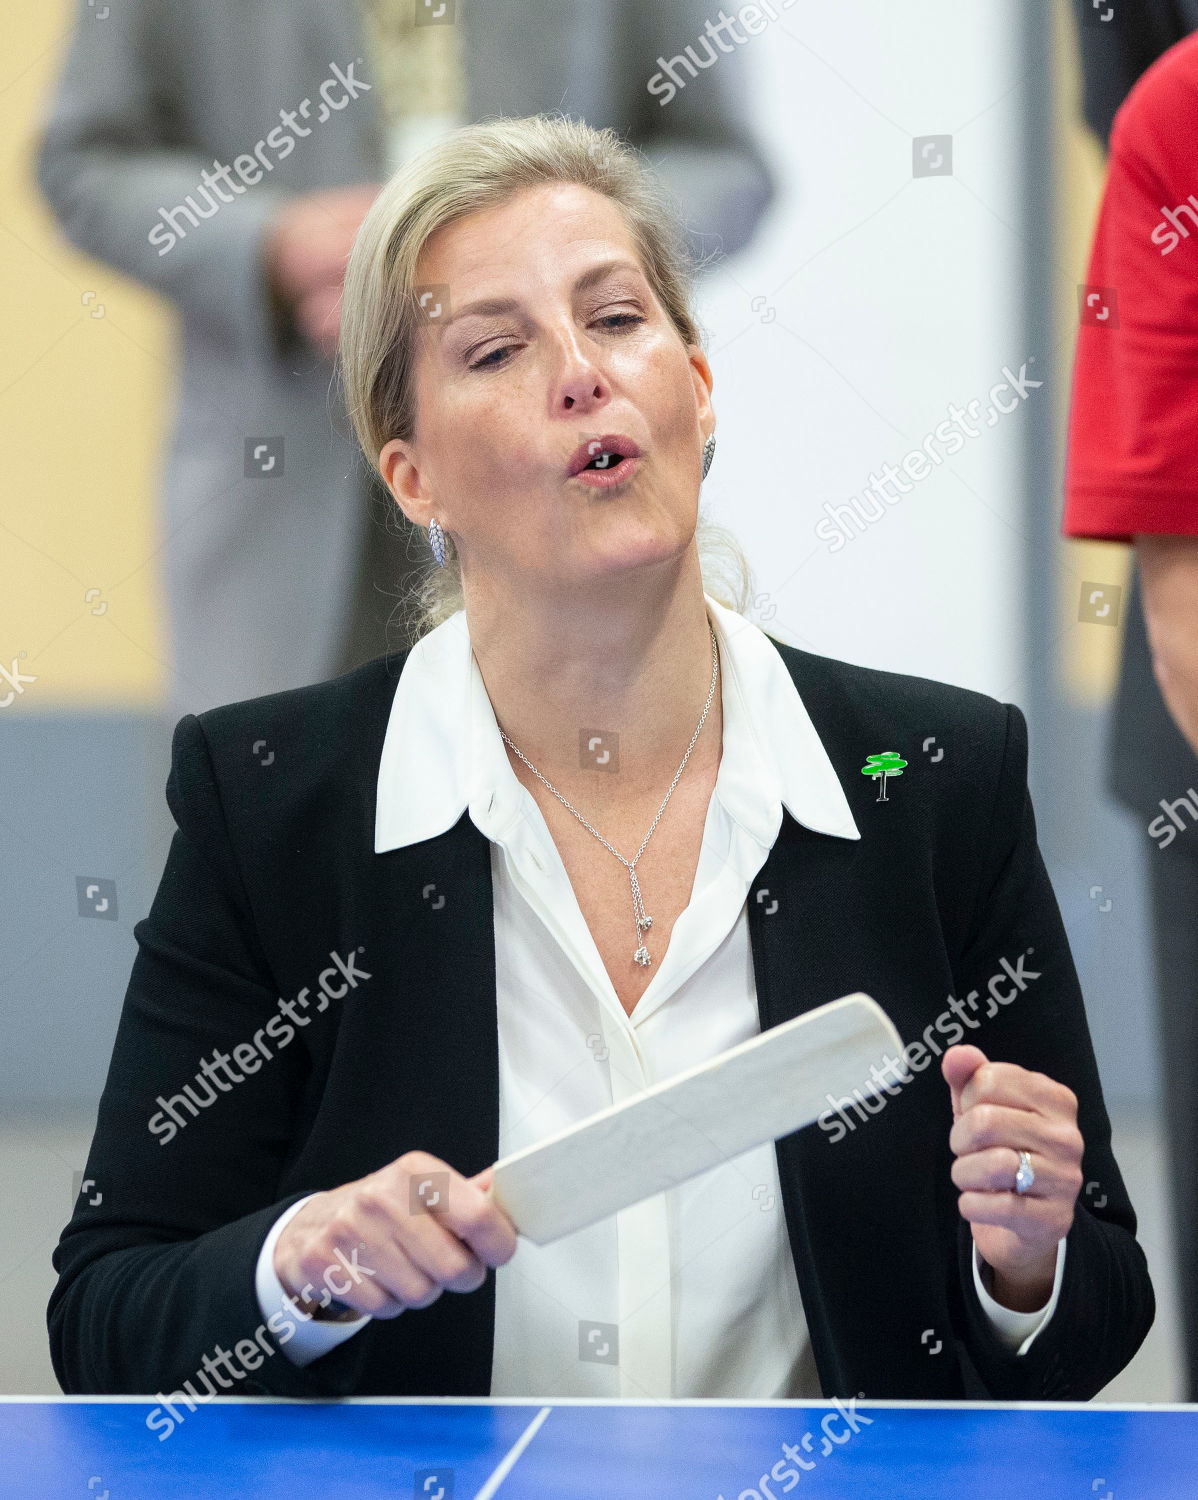 sophie-countess-of-wessex-visits-the-treloar-trust-college-holybourne-uk-shutterstock-editorial-10279529y.jpg